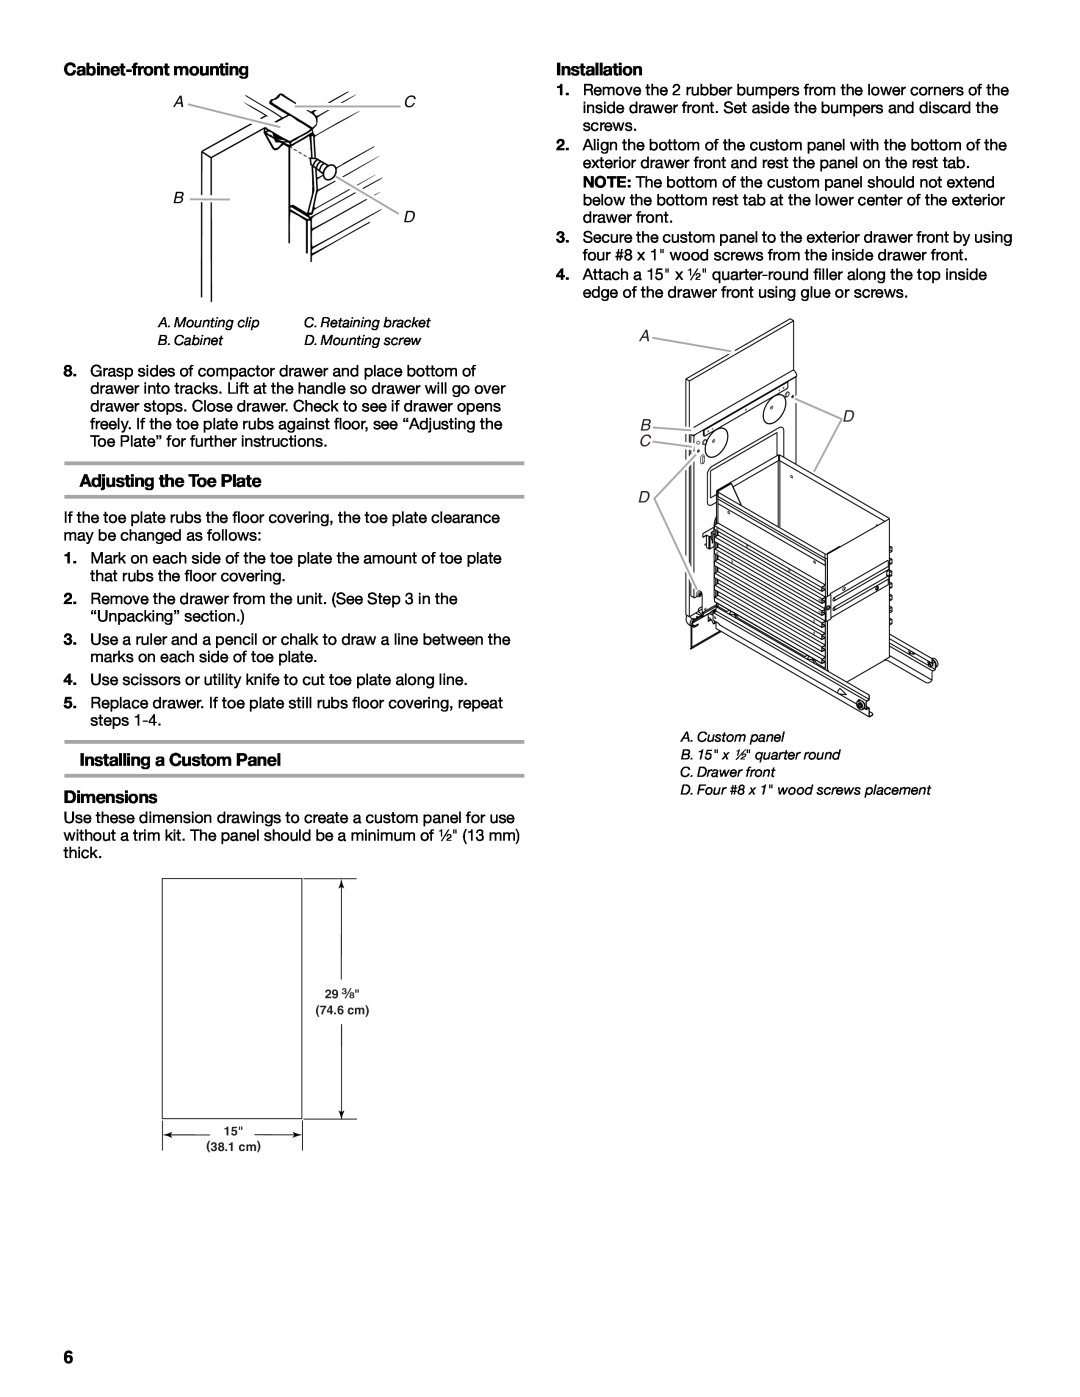 KitchenAid W10242569A Cabinet-front mounting, Installation, Adjusting the Toe Plate, Installing a Custom Panel Dimensions 